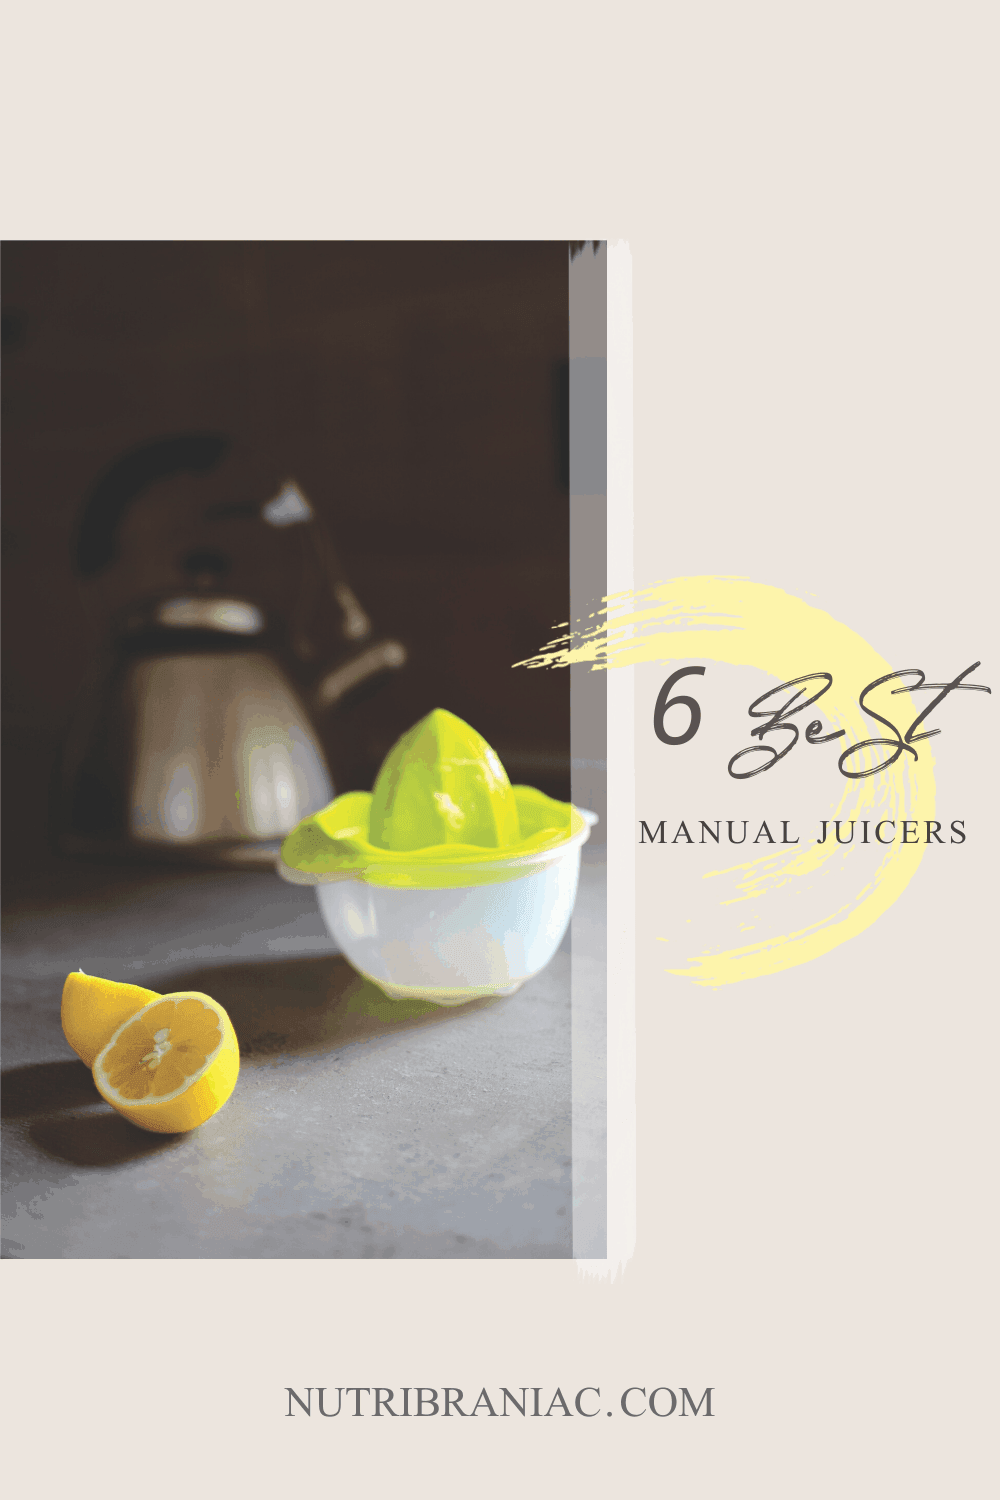 Having a good manual juicer in your kitchen arsenal is essential. A manual juicer is an affordable option compared to other advanced juicers. In our helpful buying, we share our favorite manual juicers on the market today. #manualjuicerproducts #manualjuicerstainlesssteel #manualjuicermachine #citrusjuicermanual #juicingrecipes #juicingforbeginners #juicingonabudget